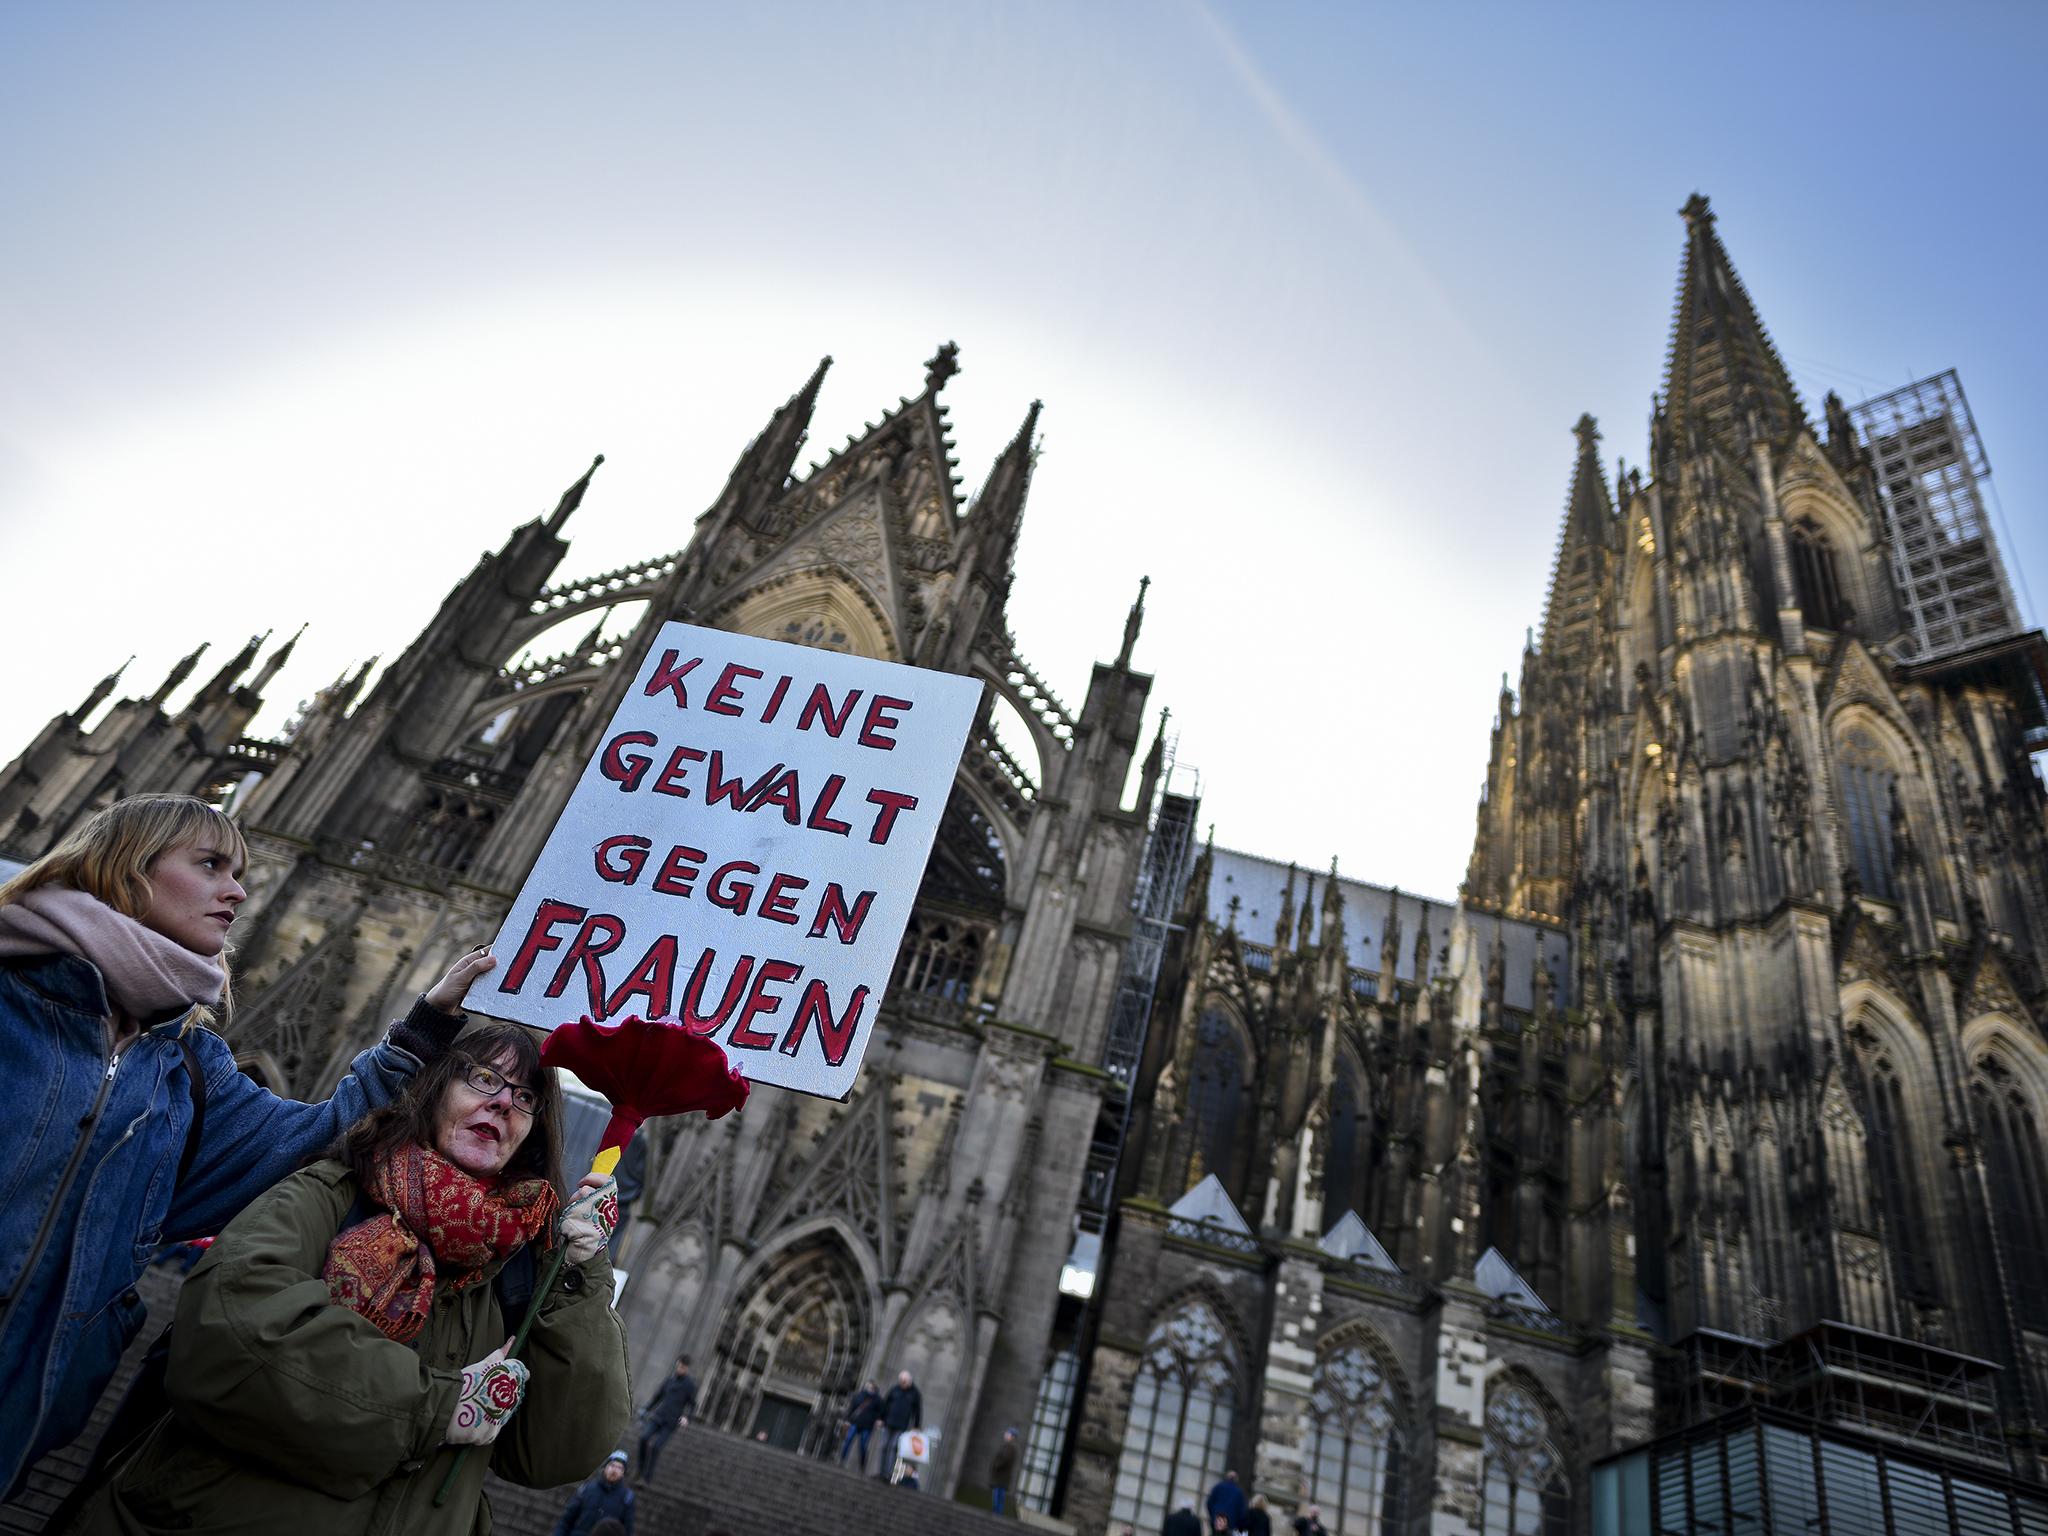 Over 1,000 incidents of sexual and robbery were reported in Cologne during the New Year's Eve celebrations (Getty Images)